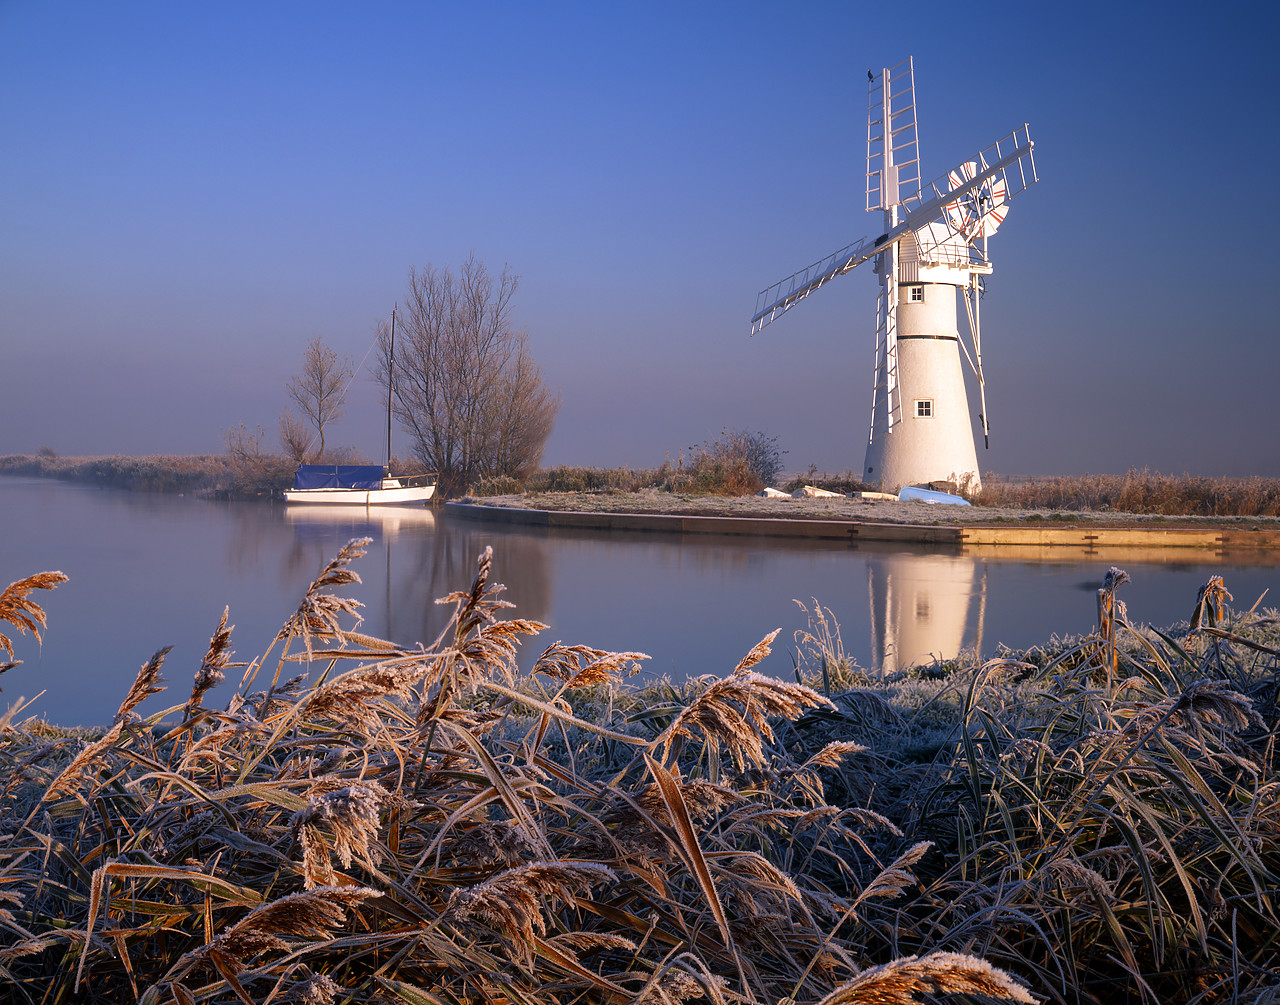 #200579-1 - Thurne Mill in Frost, River Thurne, Norfolk, England